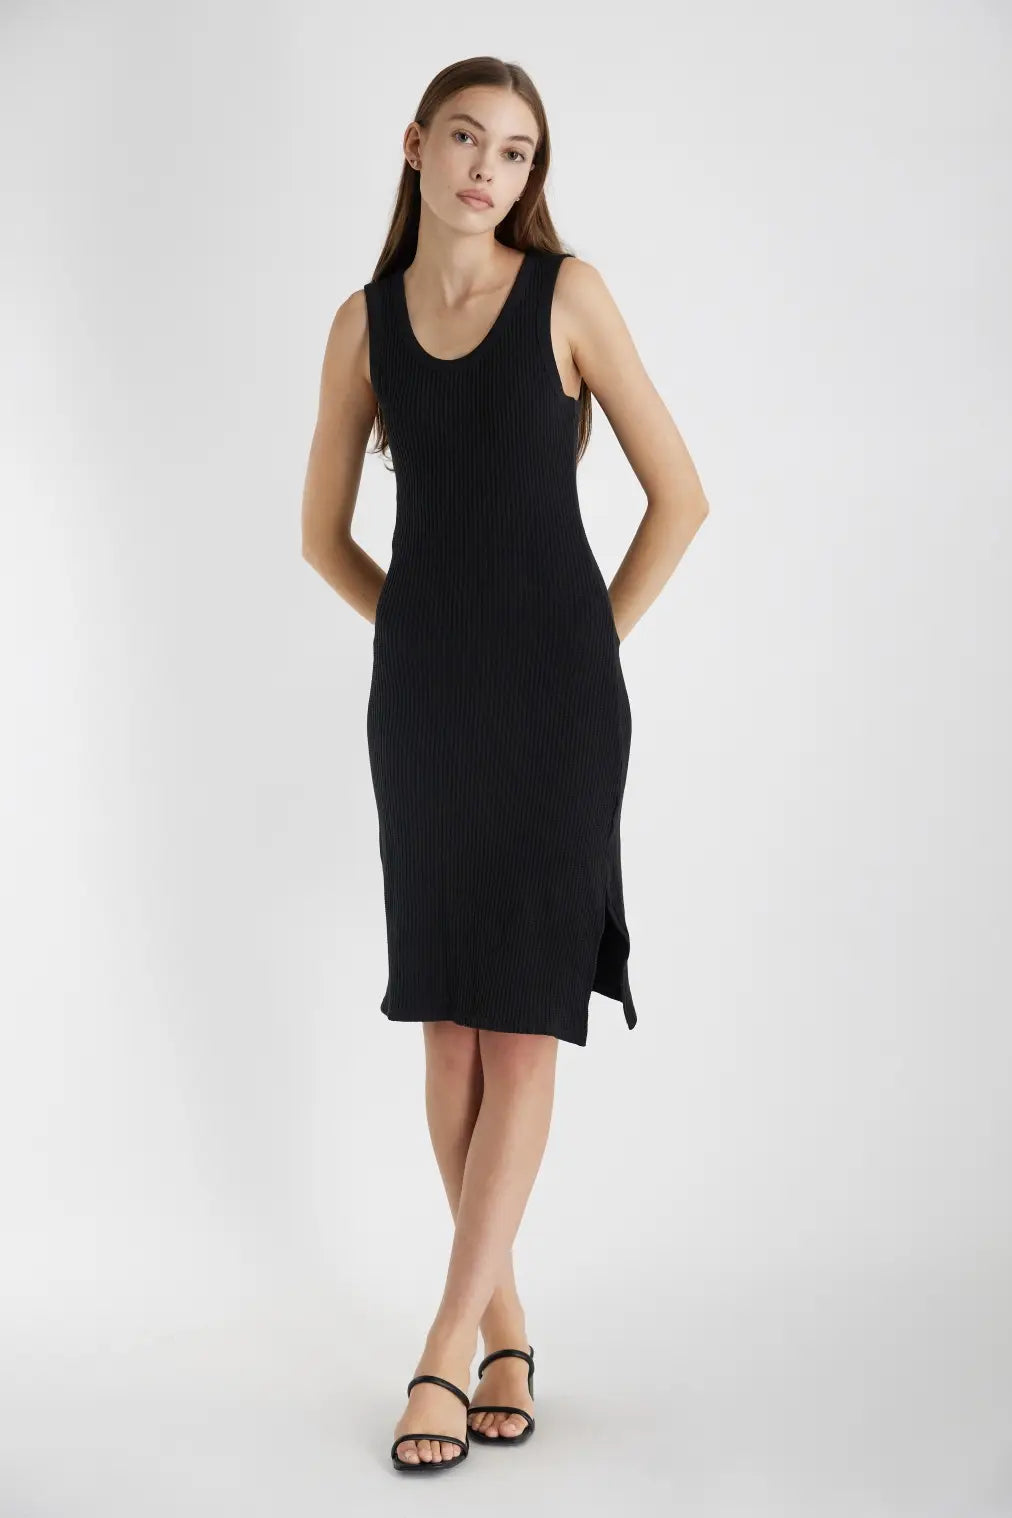 For lounging or dressing up, The Jessy Dress is a versatile tank dress crafted in a thermal waffle knit fabric - durable and soft with added warmth. A classic addition to your wardrobe. We would style this with an oversized trench and some loafers for a brunch date or coffee. 